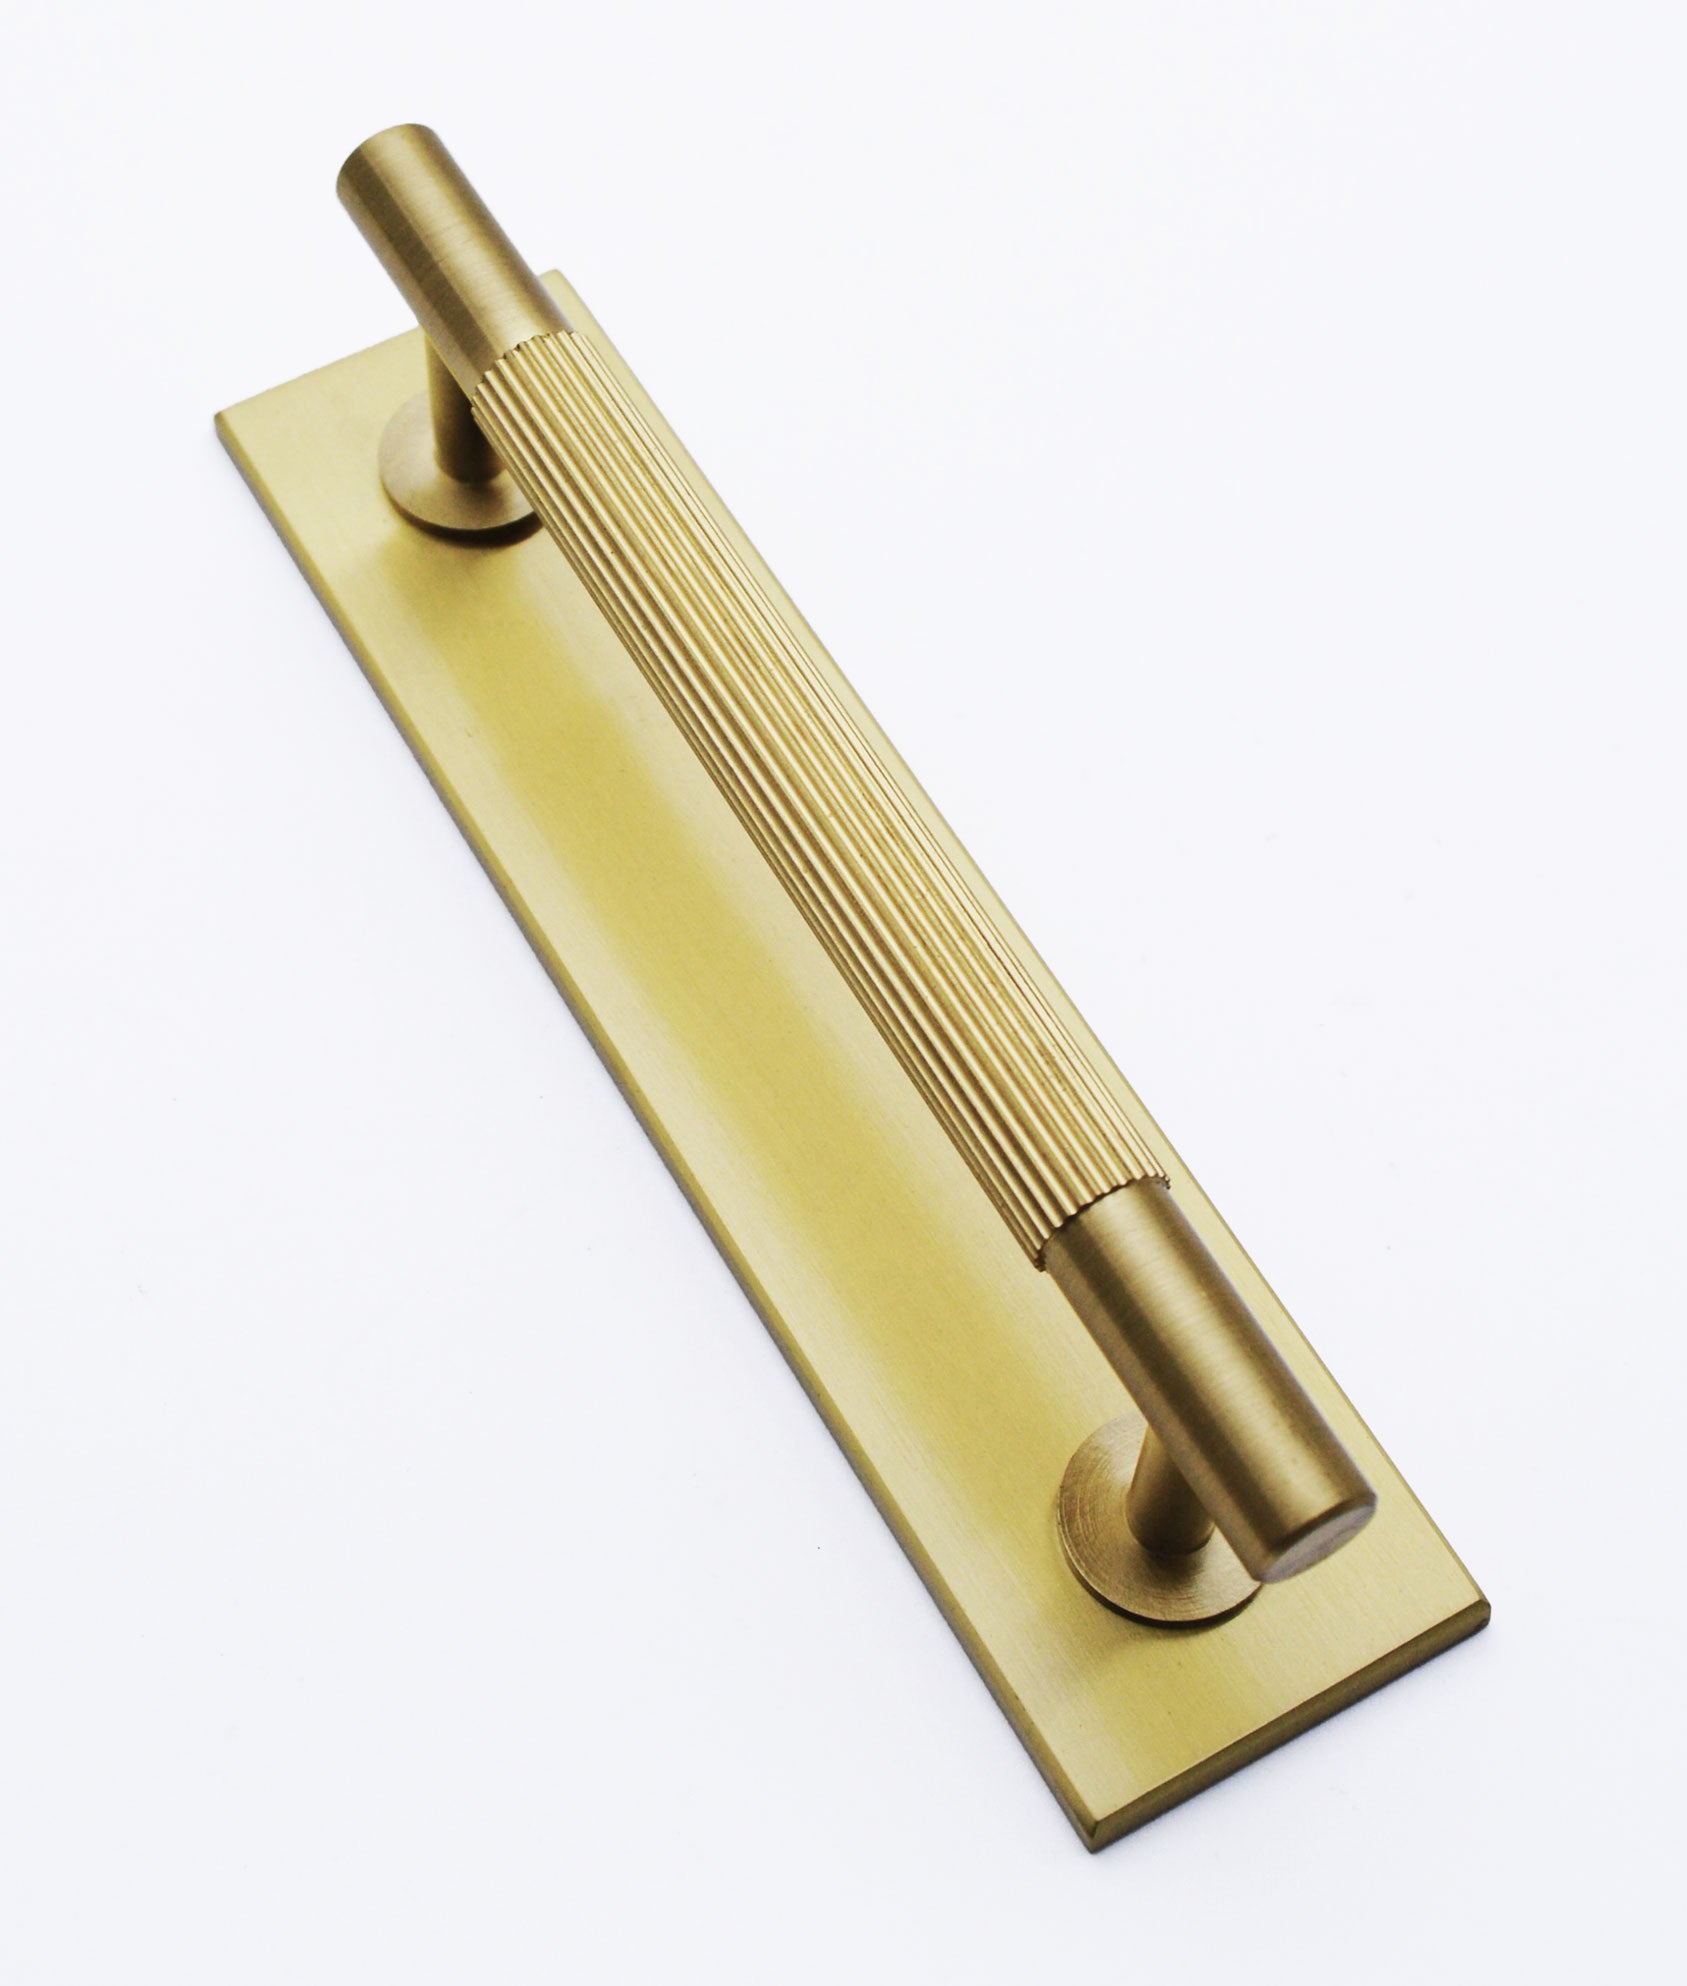 Wilton Linear Cabinet Pull Handle on Rectangular Plate